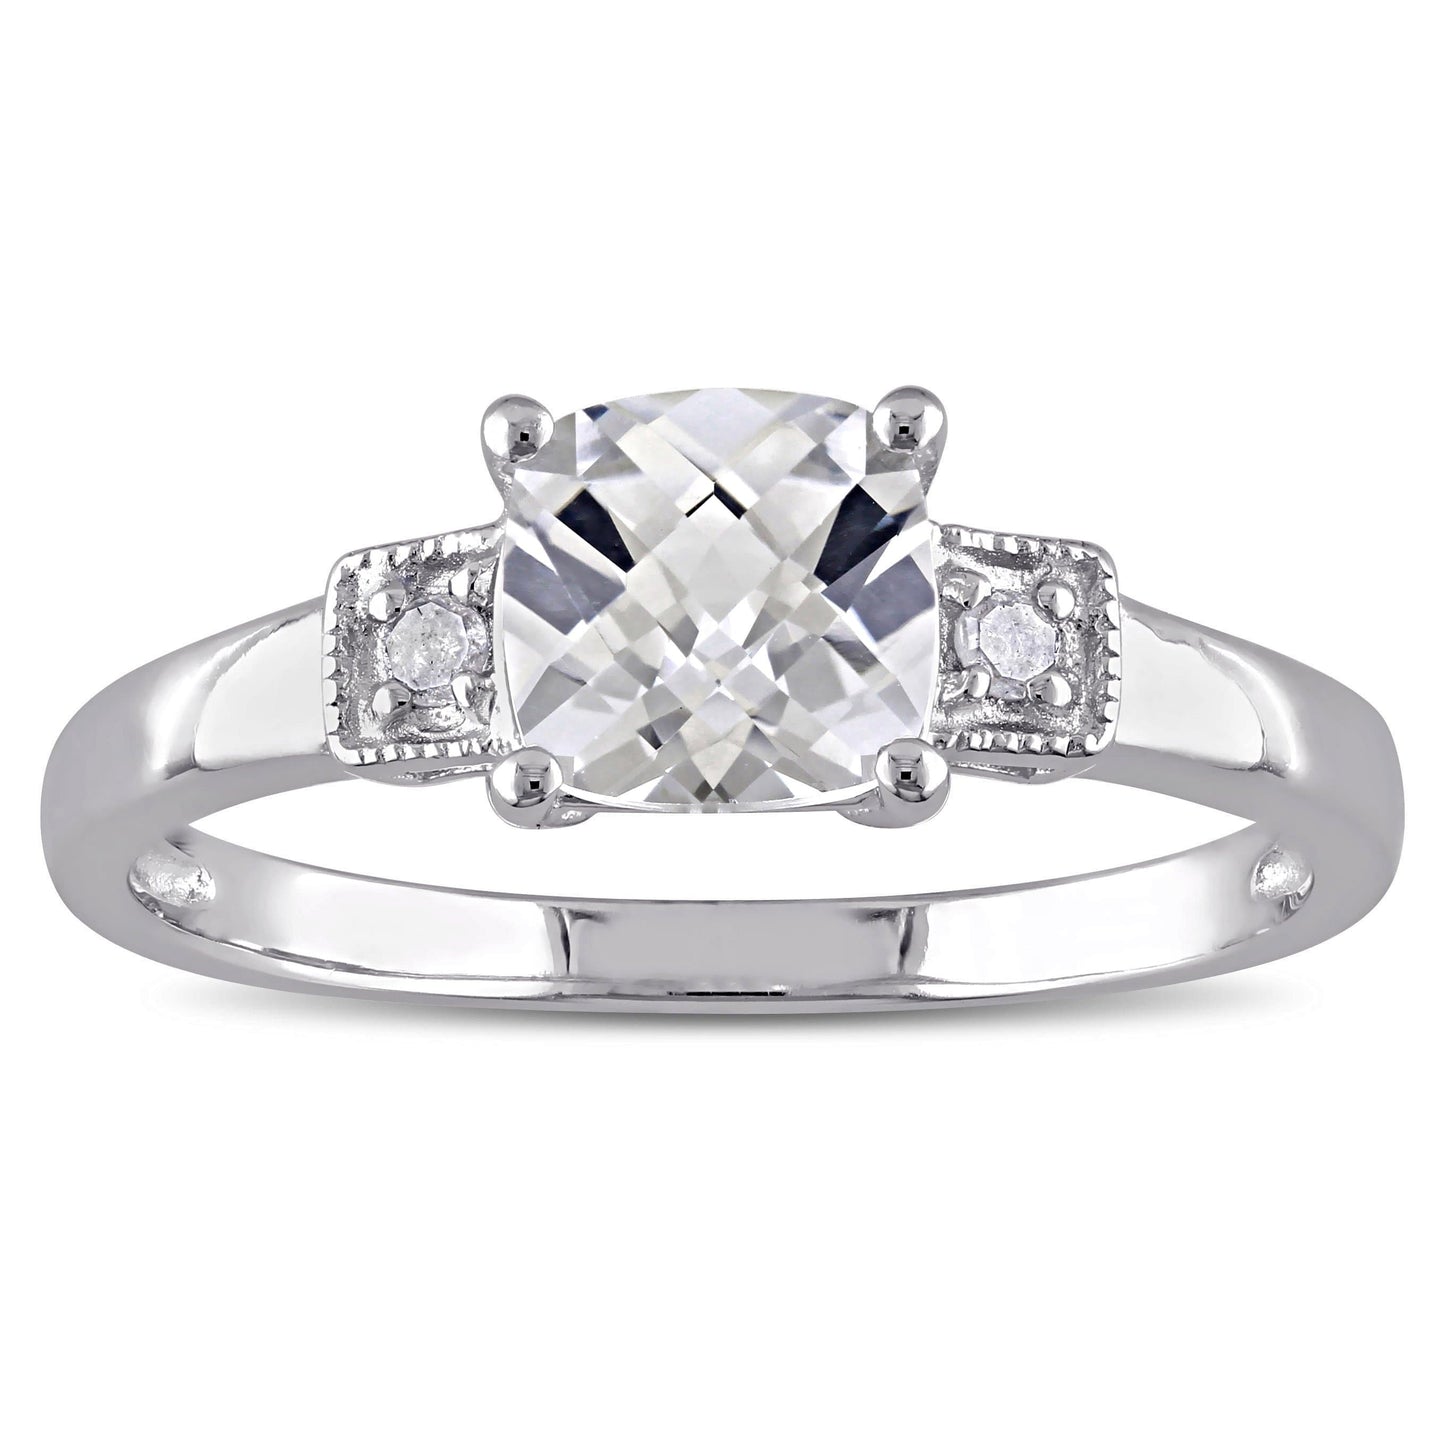 Sophia B 1 1/4ct Lab-Created White Sapphire Ring with Diamond Accents